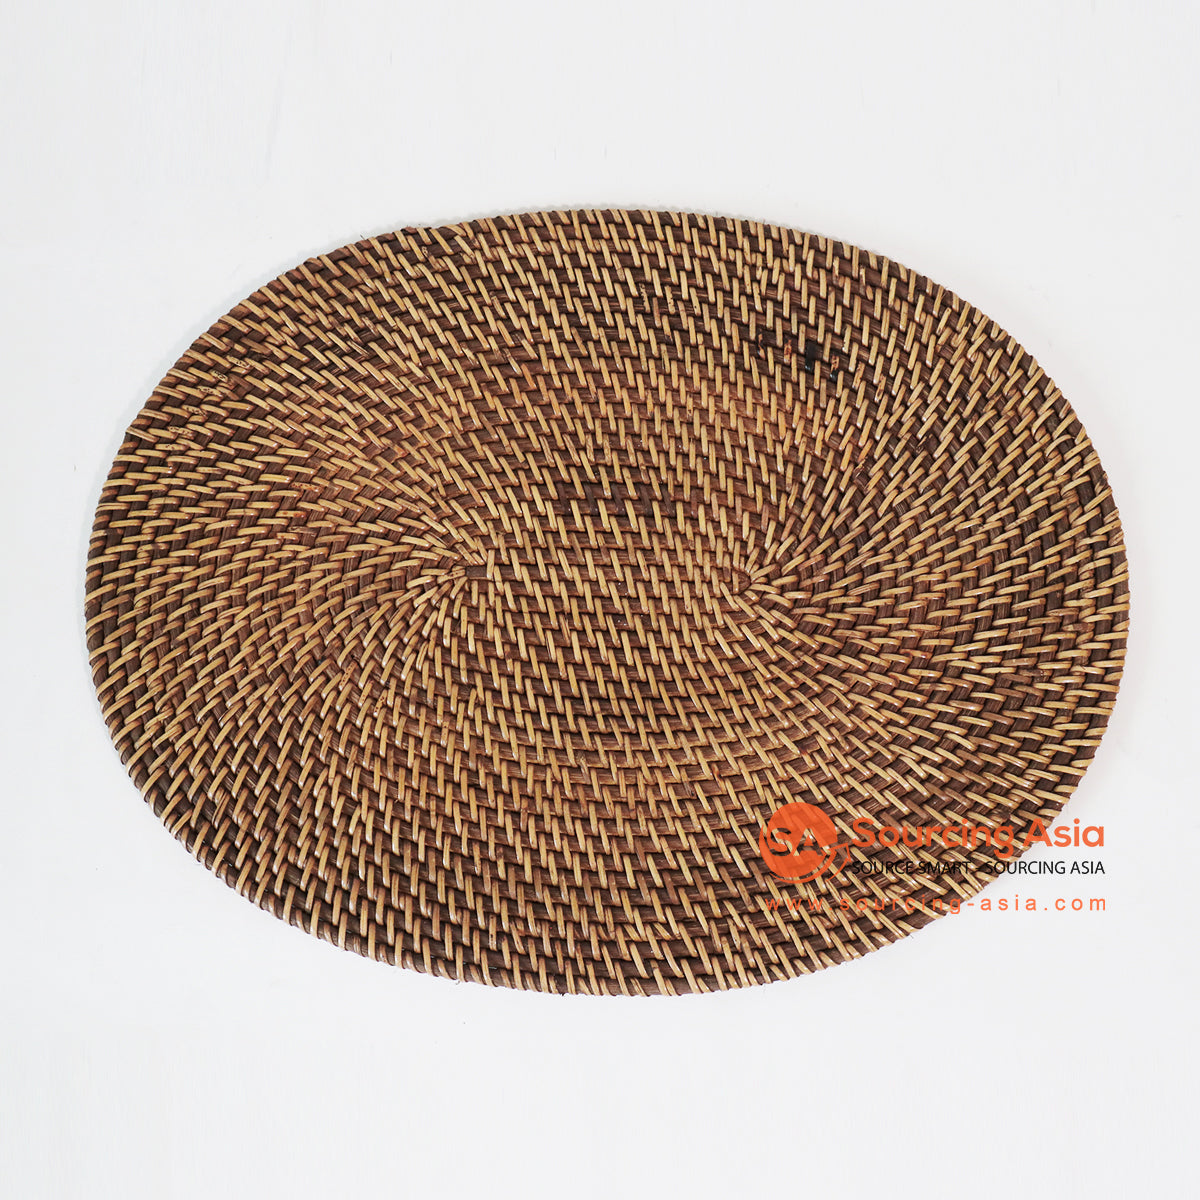 MTIC032-1 BROWN WOVEN RATTAN PLACEMAT